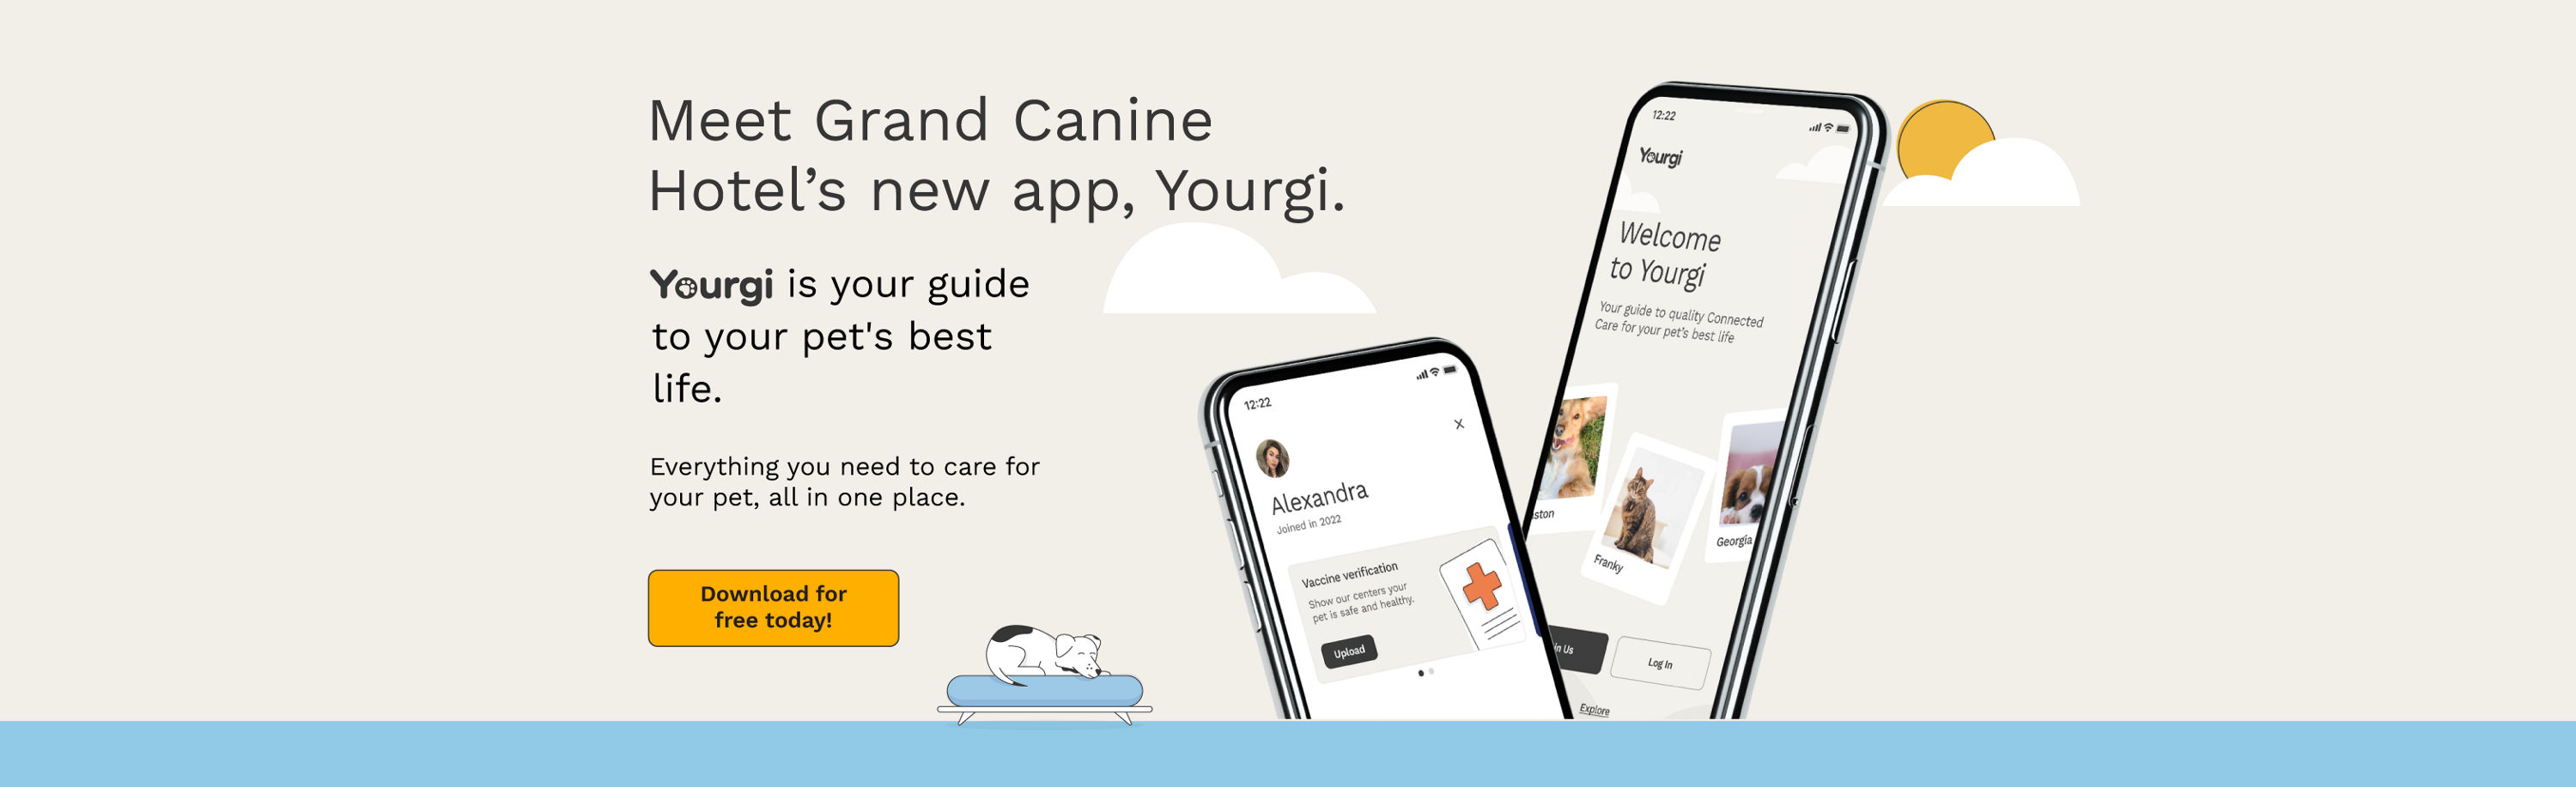 Grand Canine Hotel's new app, Yourgi